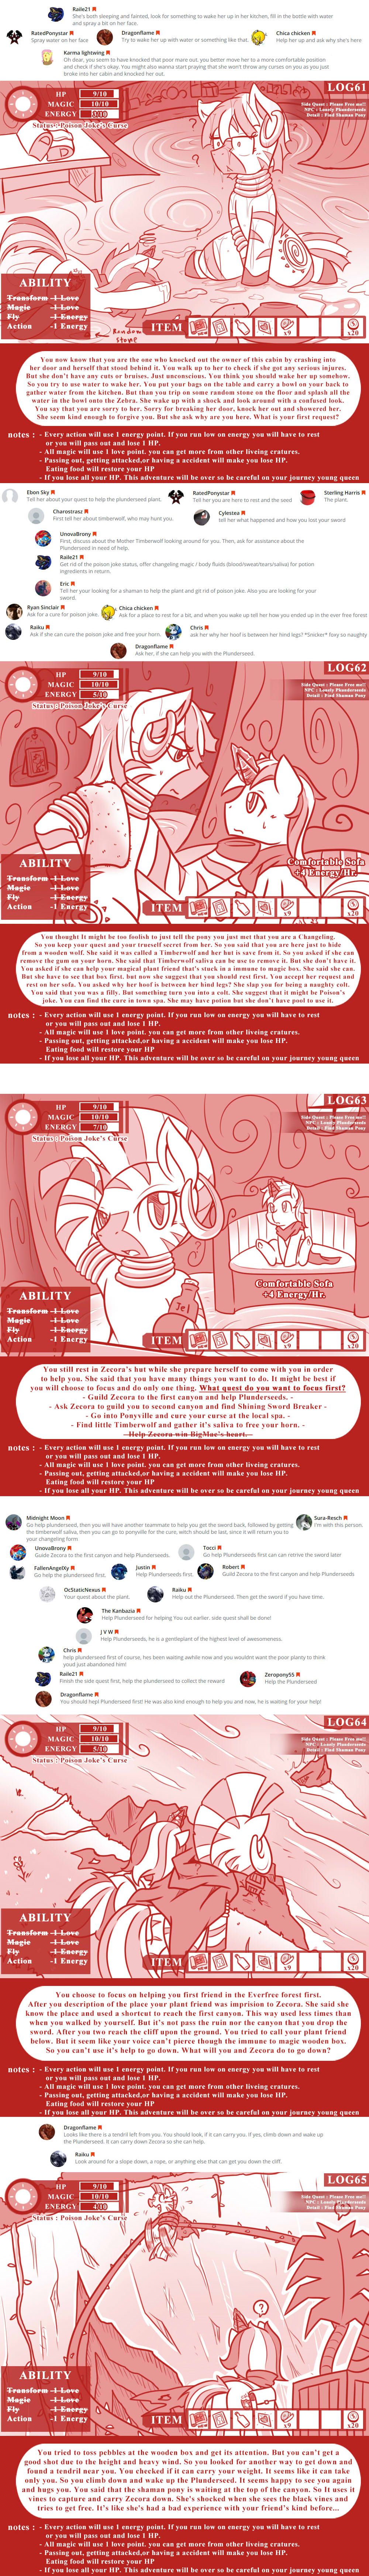 [Vavacung] The Adventure Logs Of Young Queen (My Little Pony Friendship is Magic) [Updated] [Ongoing] 15